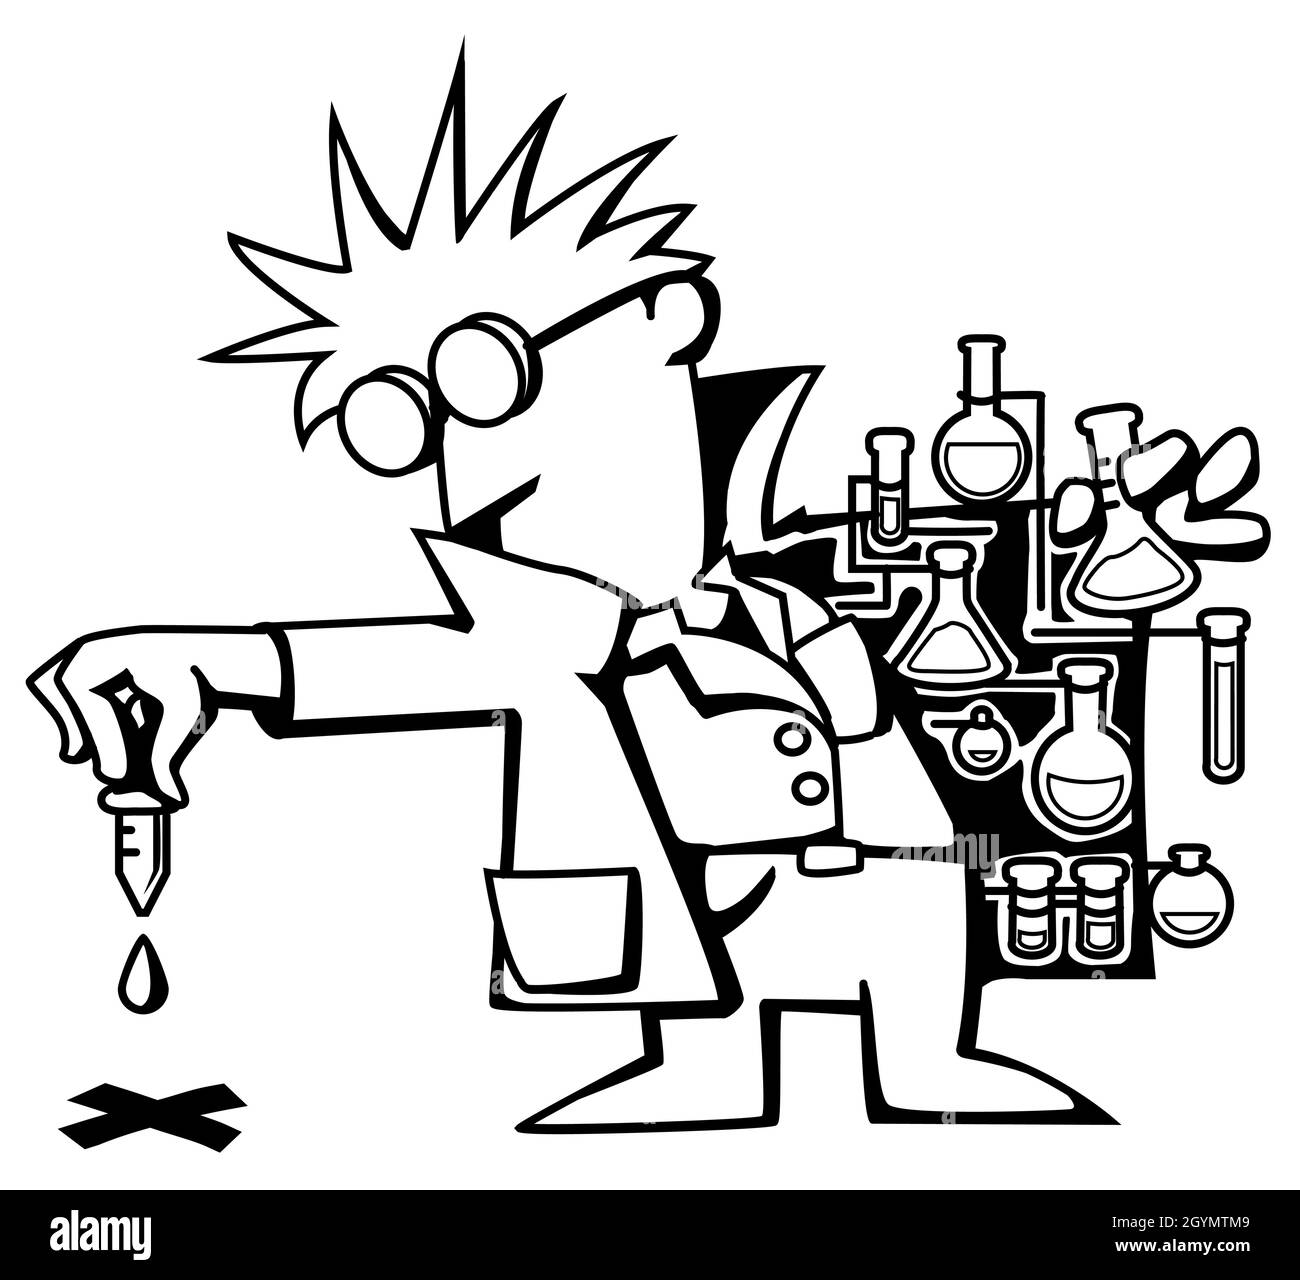 Chemistry cartoon Black and White Stock Photos & Images - Alamy